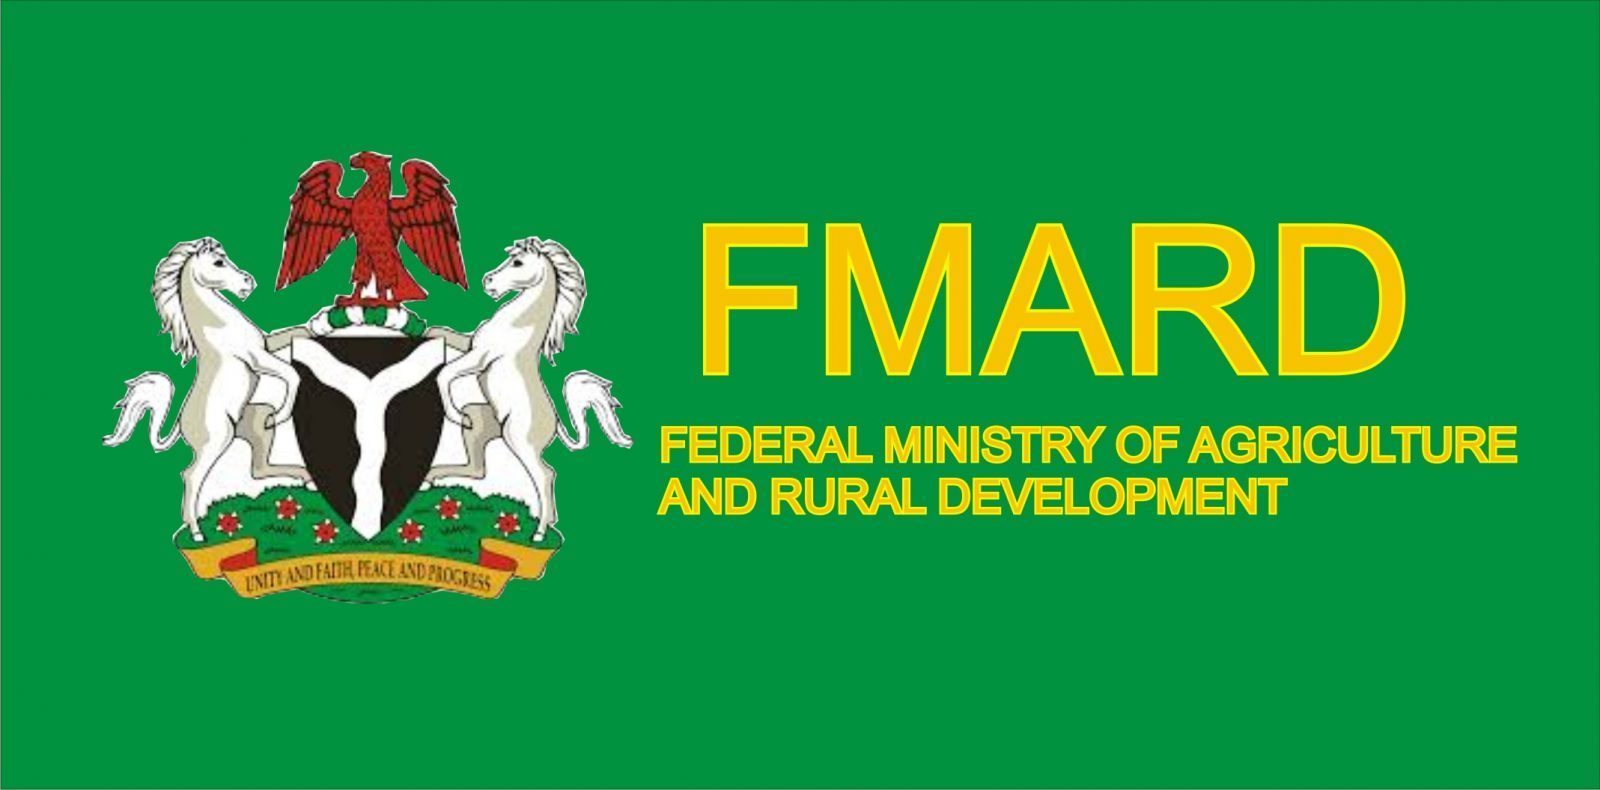 Federal Ministry of Agriculture and Rural Development - FMARD recruitment 2019